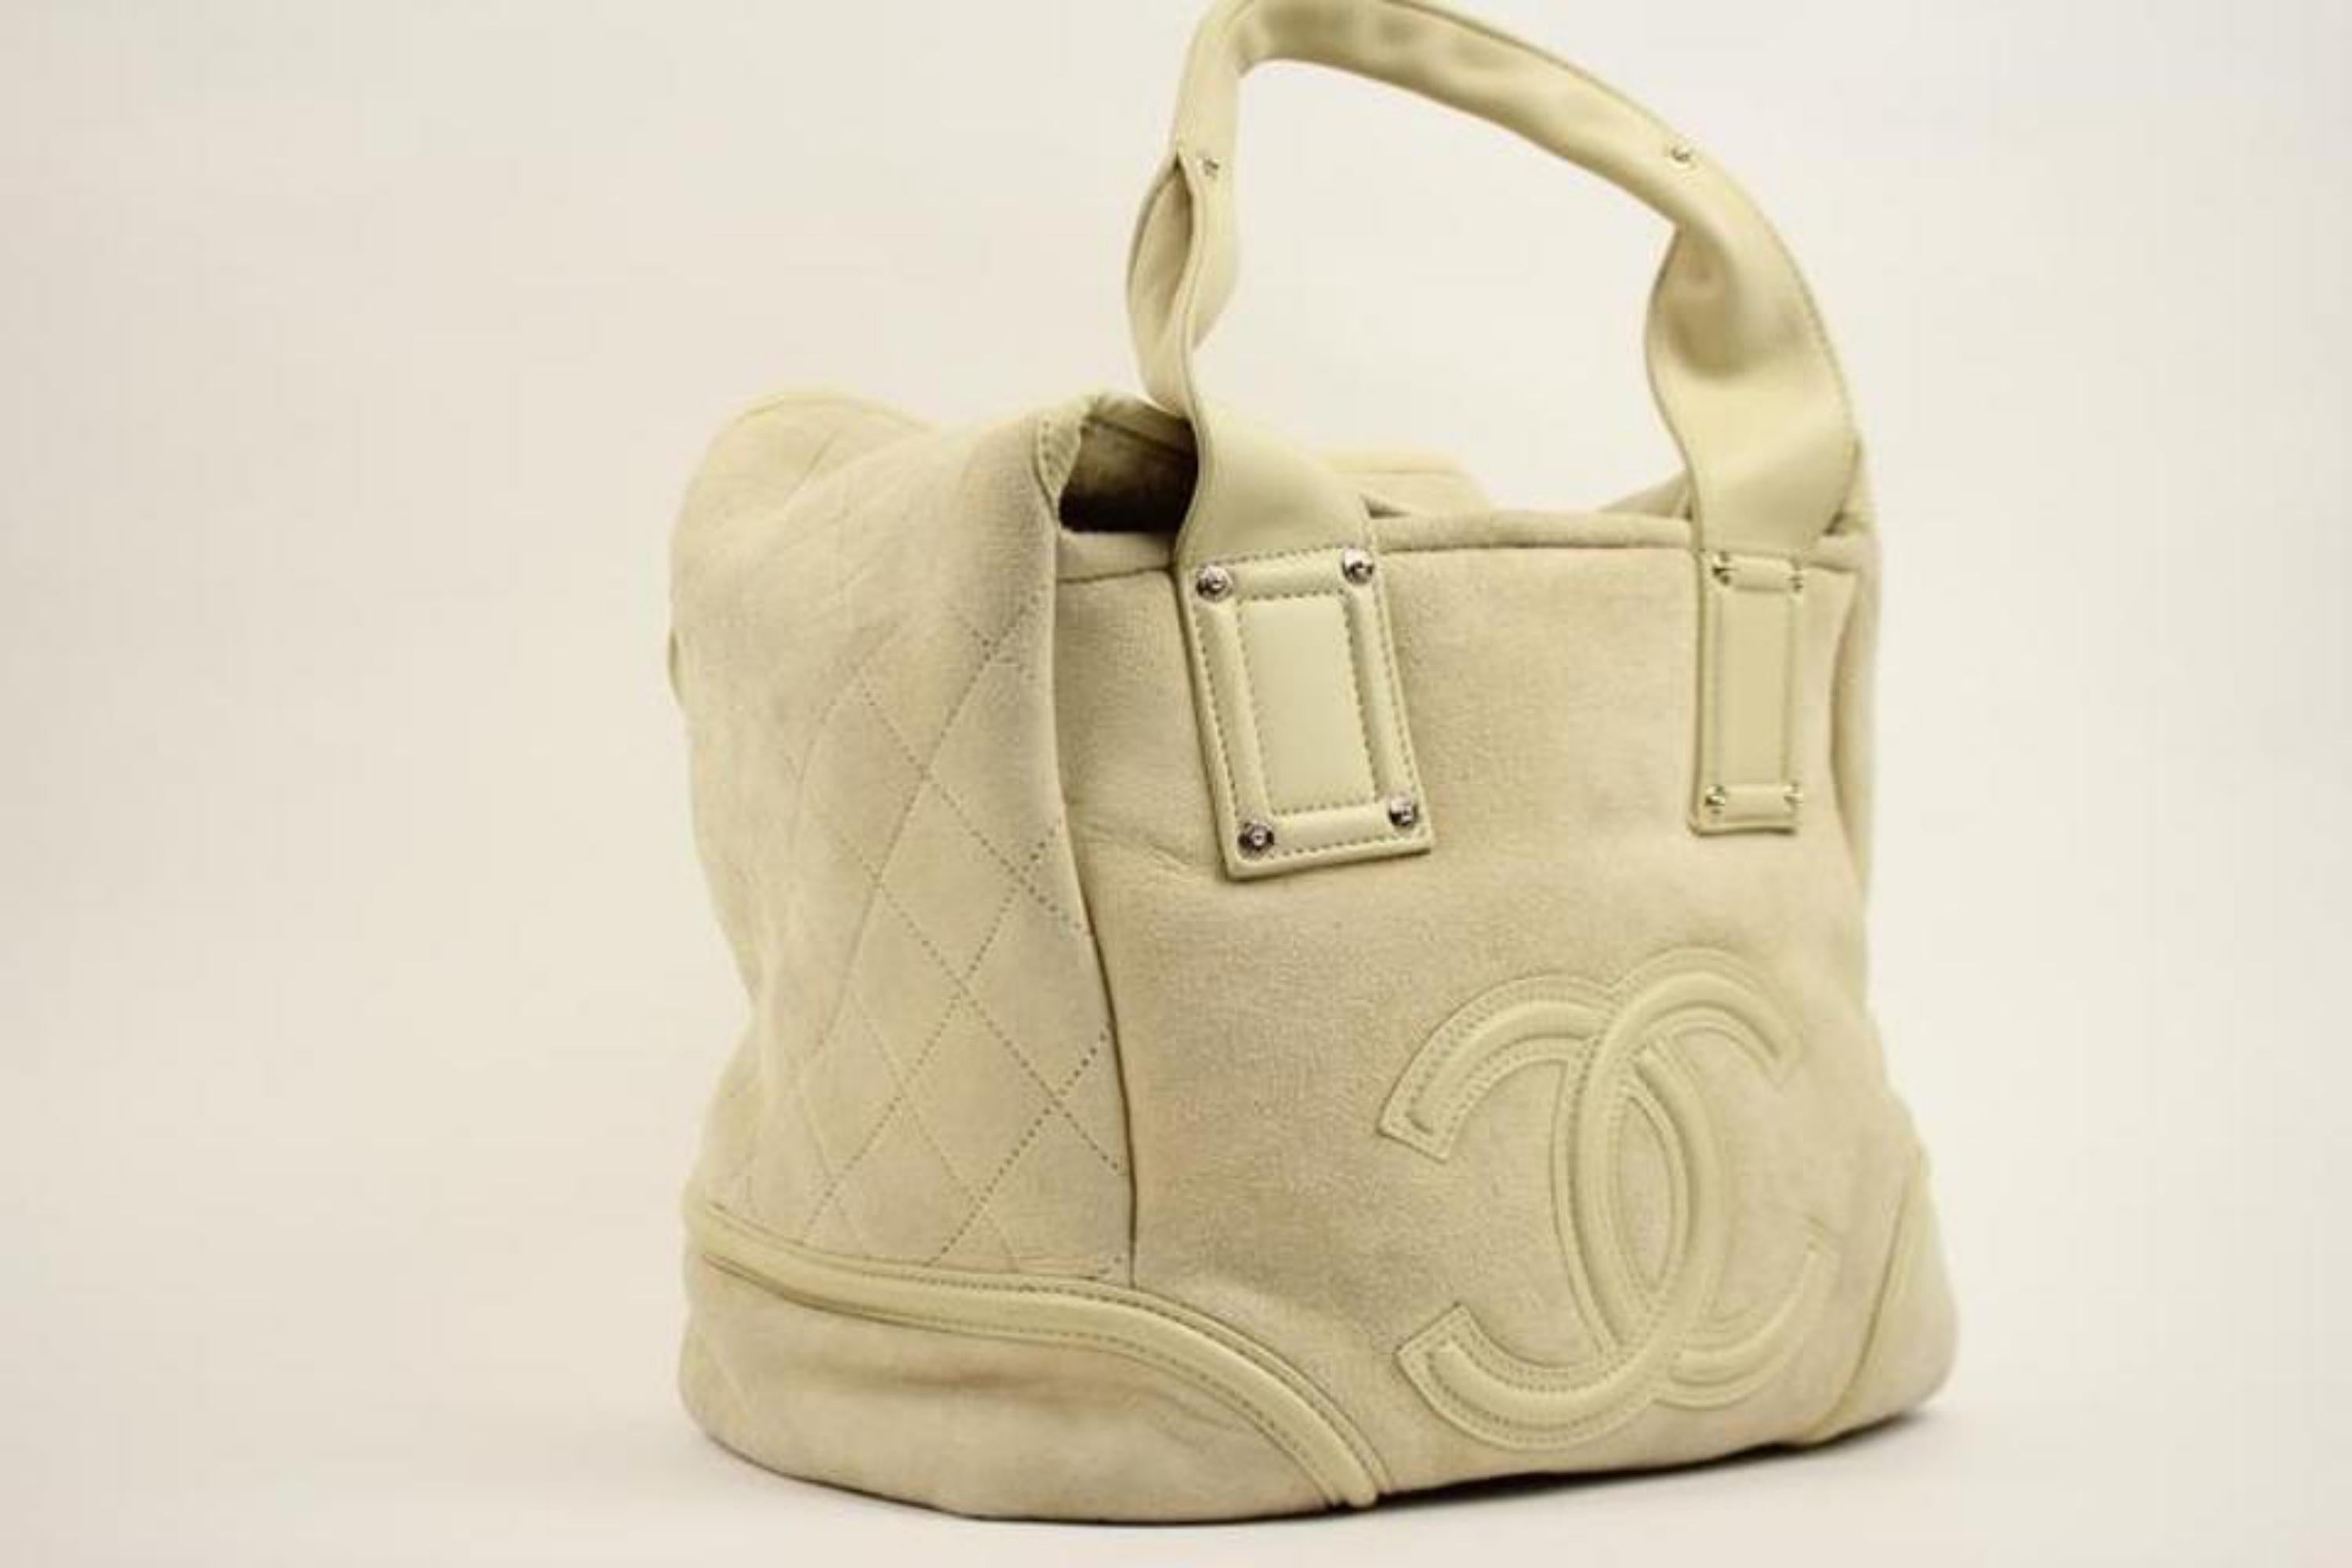 Chanel Convertible Fur Tote 37cca629 Beige Shearling Satchel For Sale 5